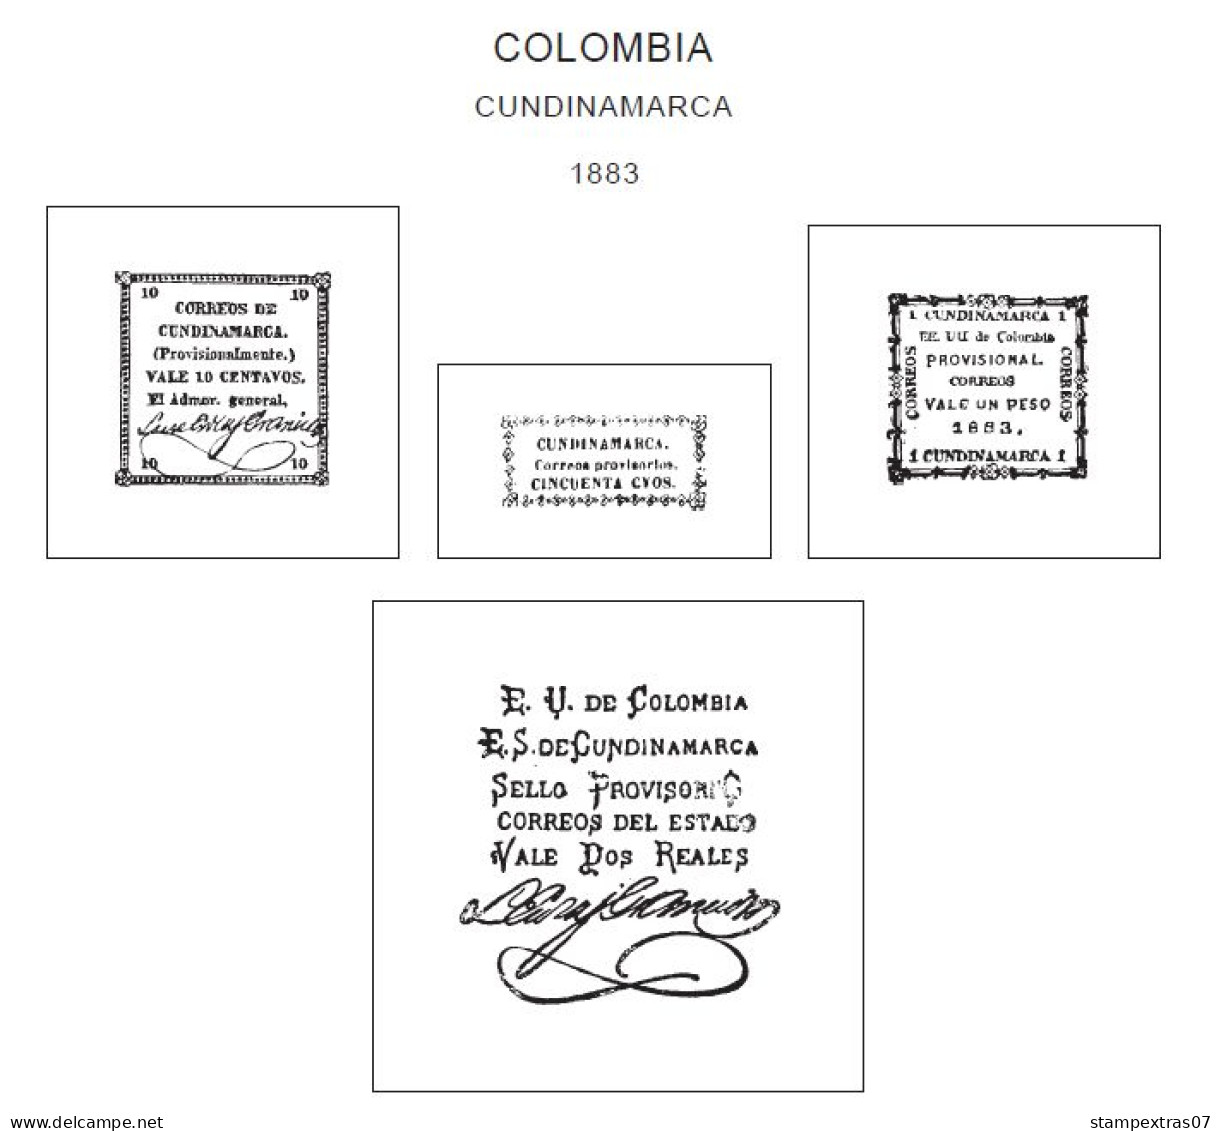 COLOMBIA STAMP ALBUM PAGES 1859-2011 (353 Pages) - Engels